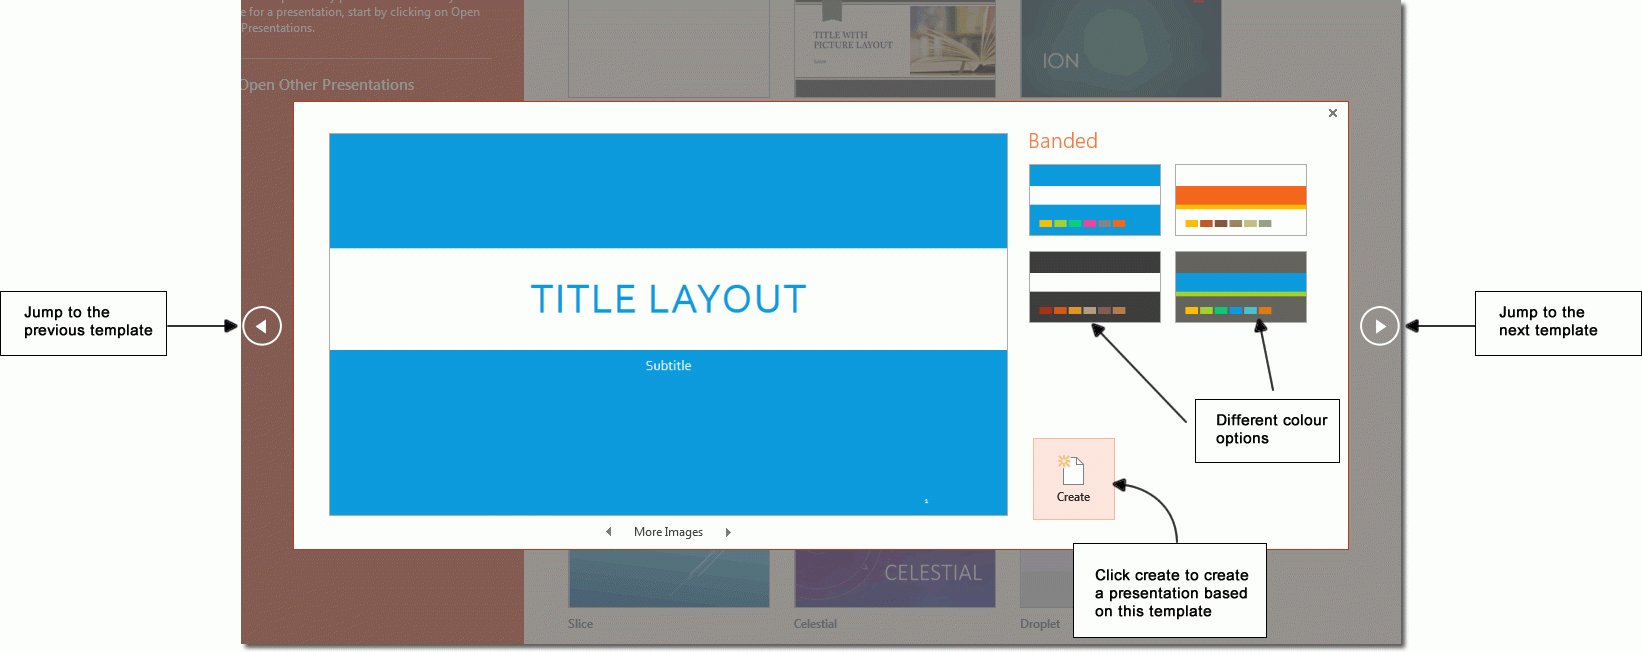 Powerpoint 2013 Templates – Microsoft Powerpoint 2013 Tutorials Throughout Powerpoint 2013 Template Location